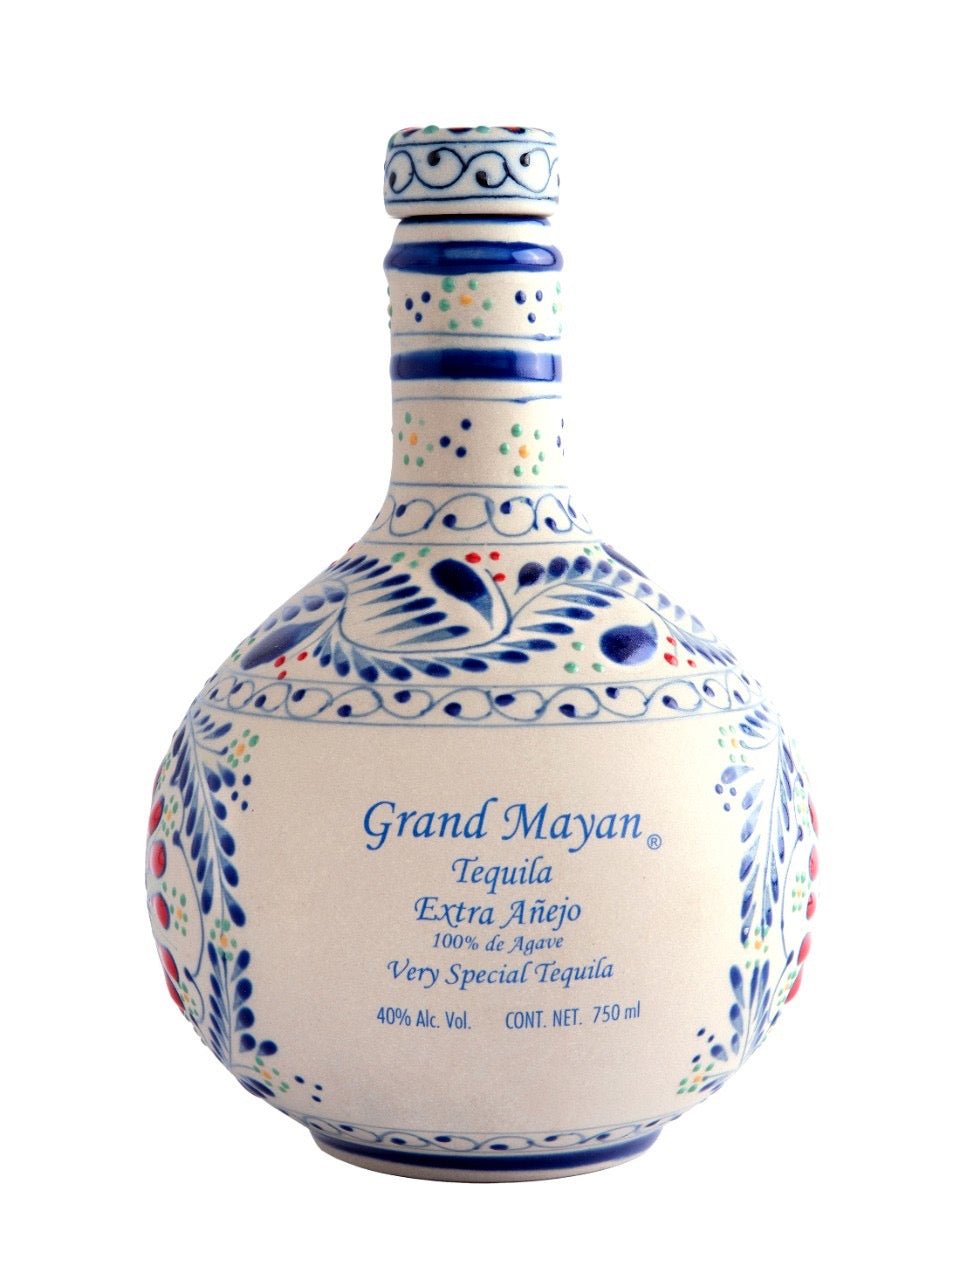 Grand Mayan Ultra Aged Extra Anejo Tequila | Exquisite Wine & Alcohol Gift Delivery Toronto Canada | Vyno